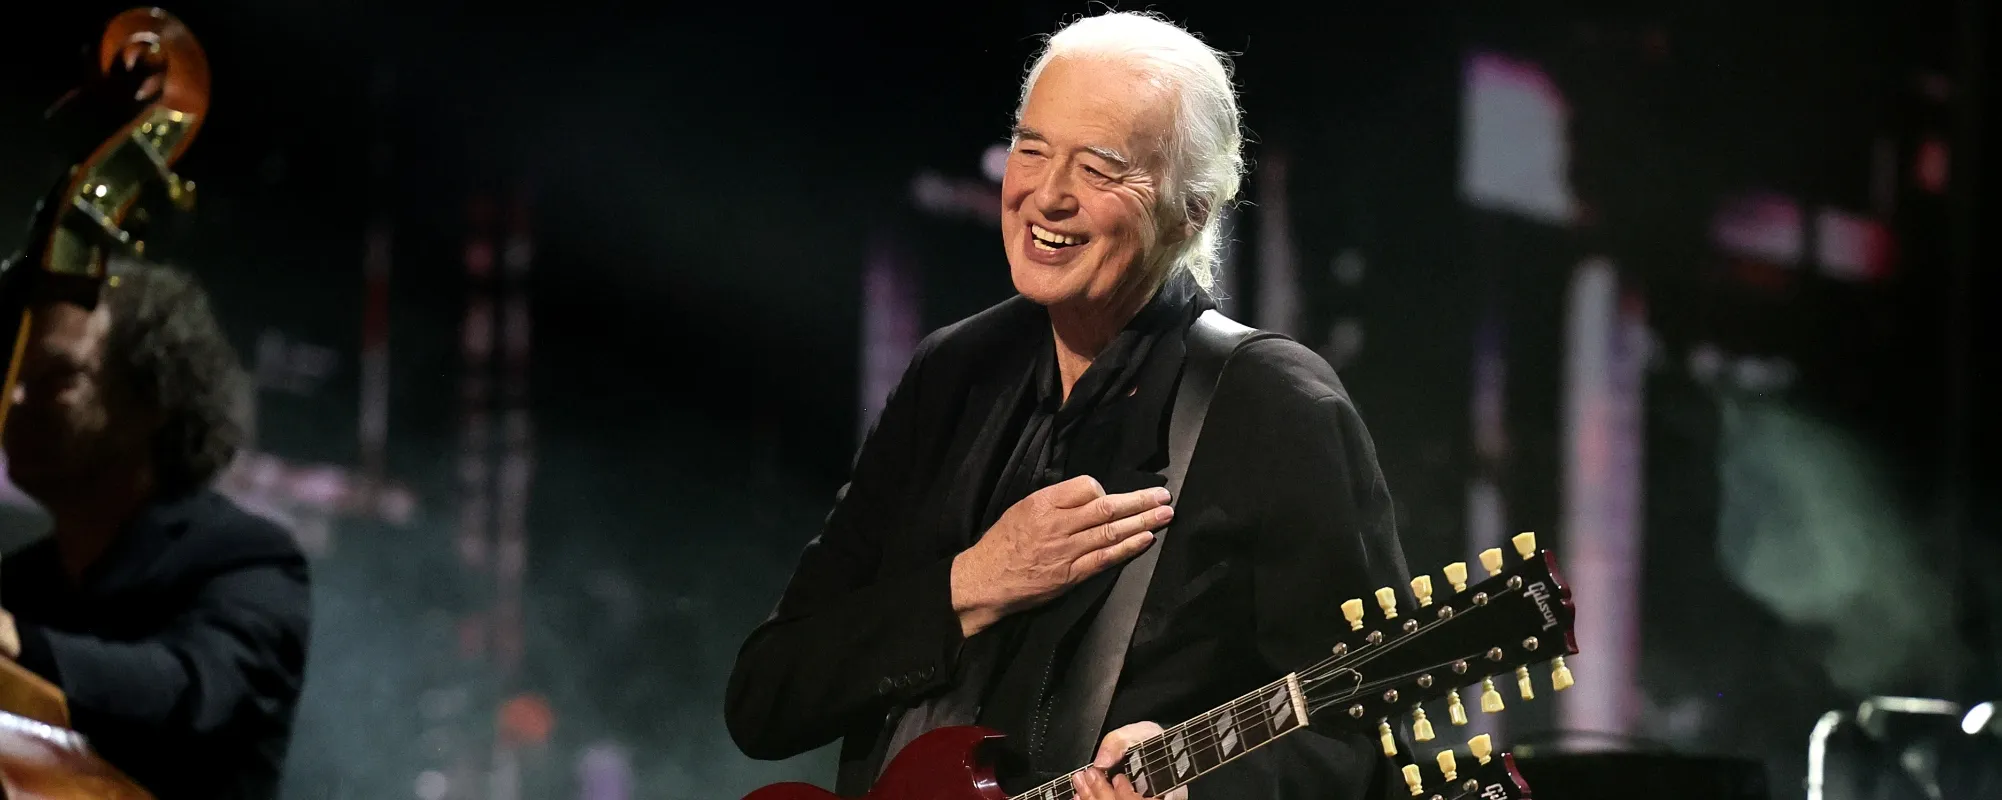 Led Zeppelin’s Jimmy Page Salutes Link Wray with Cover of “Rumble” at Rock & Roll Hall of Fame Ceremony